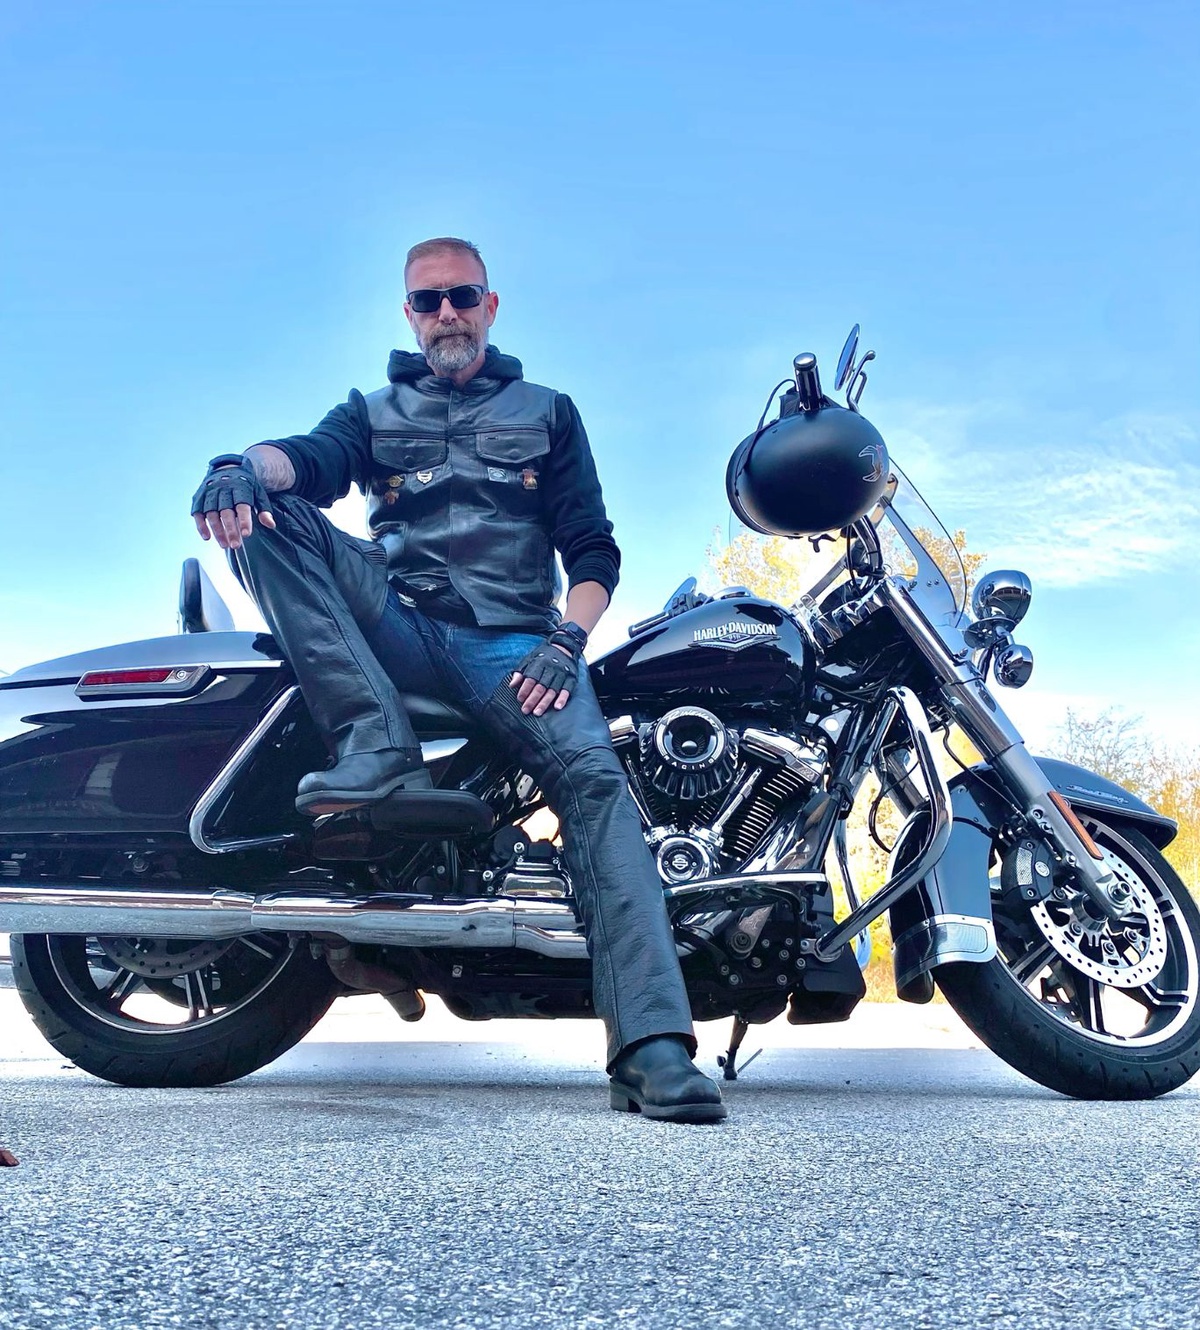 Leather Motorcycle Chaps For Men That Redefine Riding Fashion